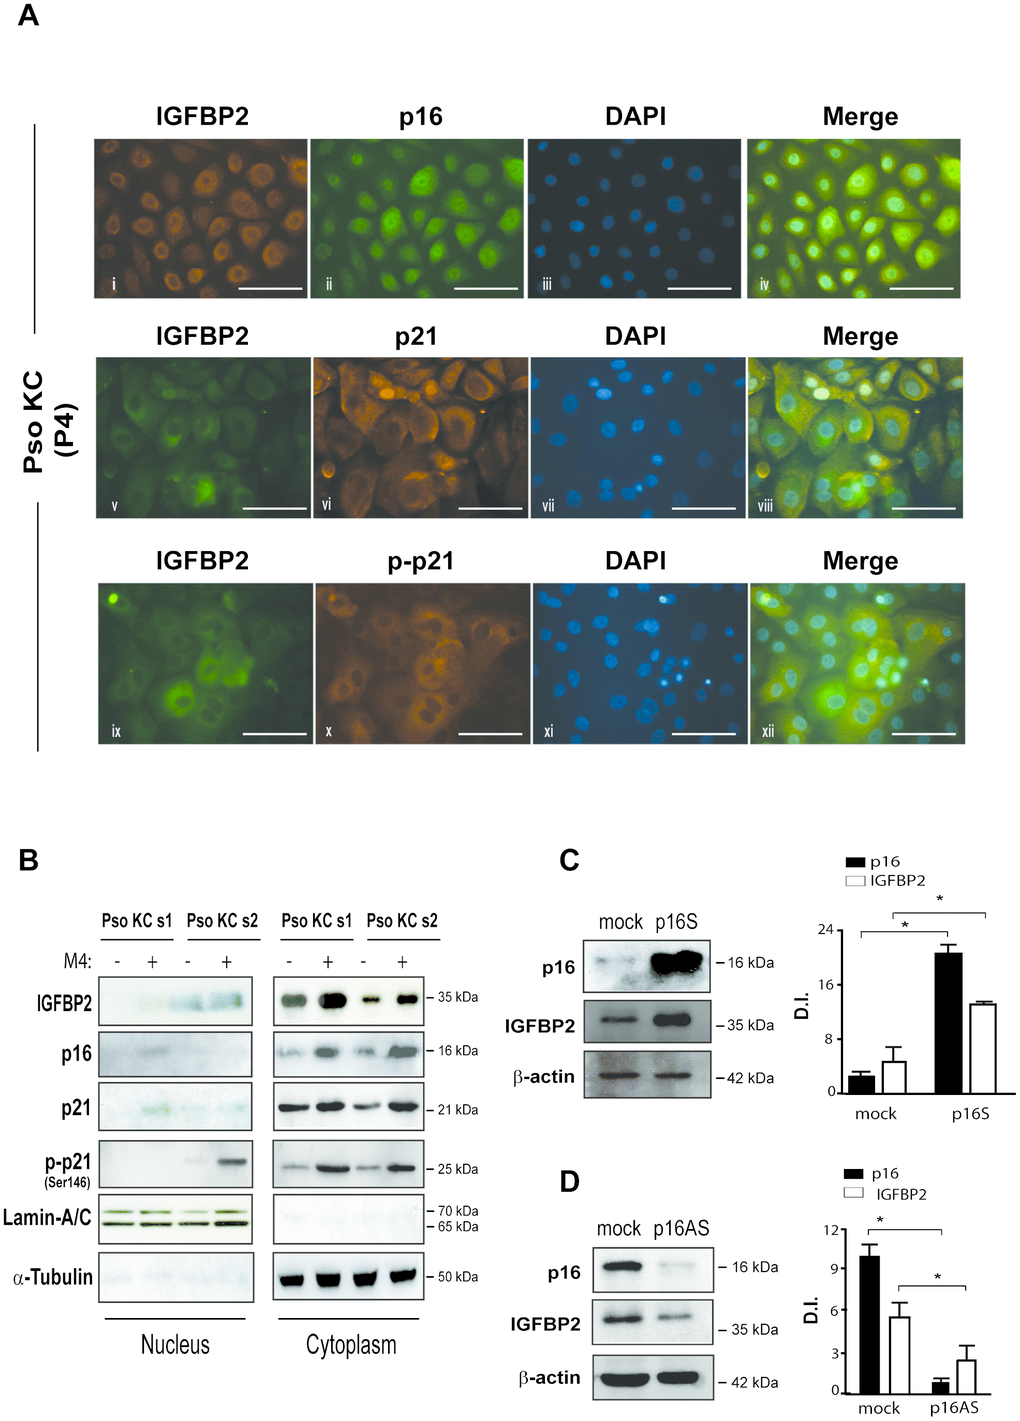 IGFBP2 co-localizes with p21 in the cytoplasm of senescent psoriatic keratinocytes and its expression is positively regulated by p16. (A) Immunofluorescence analysis was conducted on pso KC cultures (n = 3) at passage 4 (P4) to evaluate IGFBP2, p16, p21 and p-p21 subcellular localization. Cells were immunostained with anti-IGFBP2 Ab, followed by Cy3-conjugated secondary Ab (orange, panel i) or by Alexa Fluor 488-conjugated secondary Ab (green, panel v, ix), or, alternatively with p16 followed by Alexa Fluor 488 secondary Ab (green, panel ii), and p21 or p-p21 primary antibodies followed by Alexa Fluor 555 secondary Ab (orange, panels vi, x). Nuclei were counterstained with DAPI (blue) and the merging of three patterns was shown within the same field (merge, panels iv, viii, xii). Bars, 100 μM (B) IGFBP2, p16, p21 and p-p21 expression was analysed by WB on nuclear and cytosolic protein fractions obtained from two different pso KC strains (pso KC s1; pso KC s2), left untreated or treated with M4 for 18 hours. The quality of nuclear and cytosolic fractions was assessed by detection of lamin A/C and α-tubulin, respectively. (C) WB analysis was performed on lysates from primary human KC transduced with empty vector (mock) or p16 sense (p16S) vector and analysed for p16 and IGFBP2 expression. (D) Similarly, p16 and IGFBP2 expression was evaluated by WB on protein lysates obtained from primary KC cultures transduced with empty (mock) or antisense (p16AS). In (C, D), graphs show the means of the densitometric intensity (D.I.) of the bands ± SD, obtained from three independent experiments. *p ≤ 0.05, as calculated by Mann–Whitney U test.